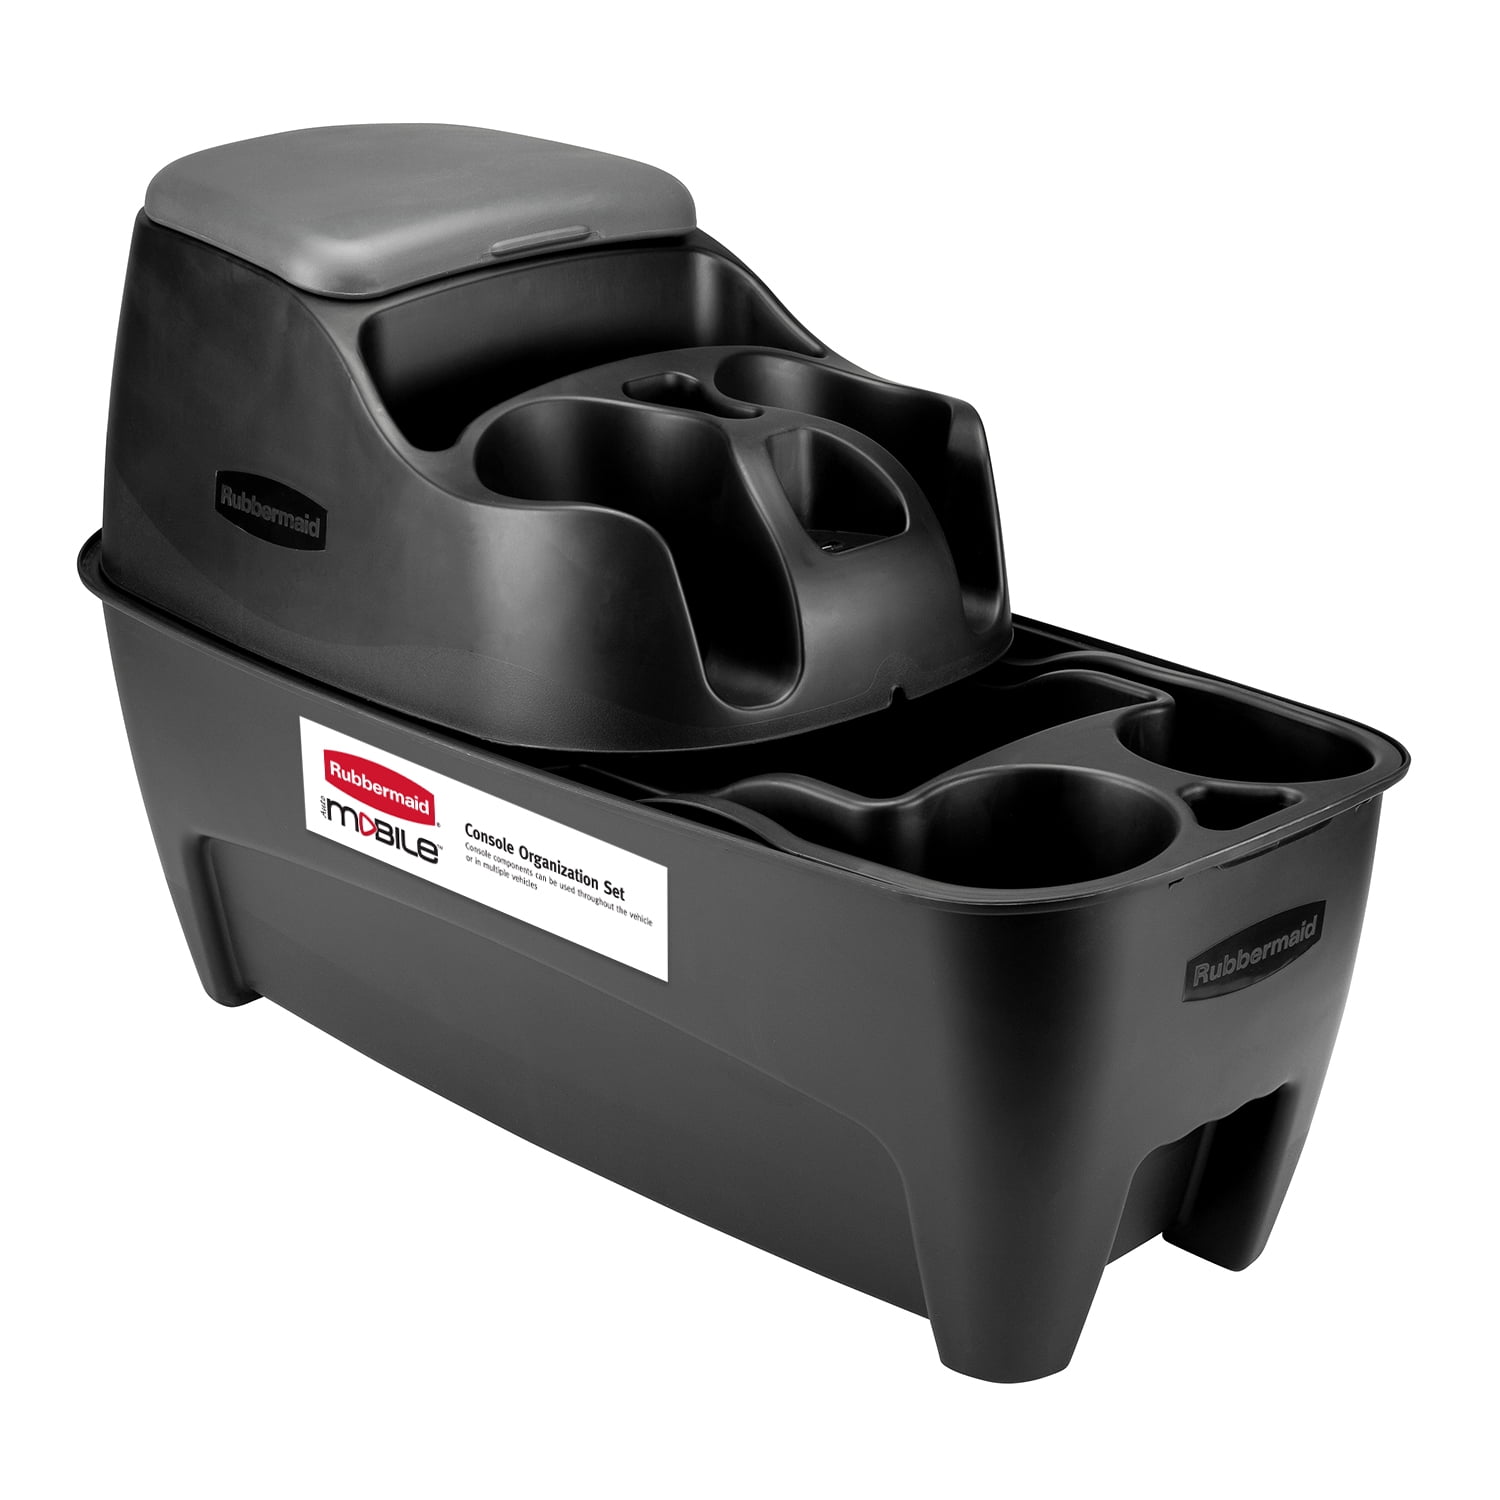 Rubbermaid 3375-00 Automotive Portable Console Organizer Caddy with Dual USB Charging Ports and Cup Holders 